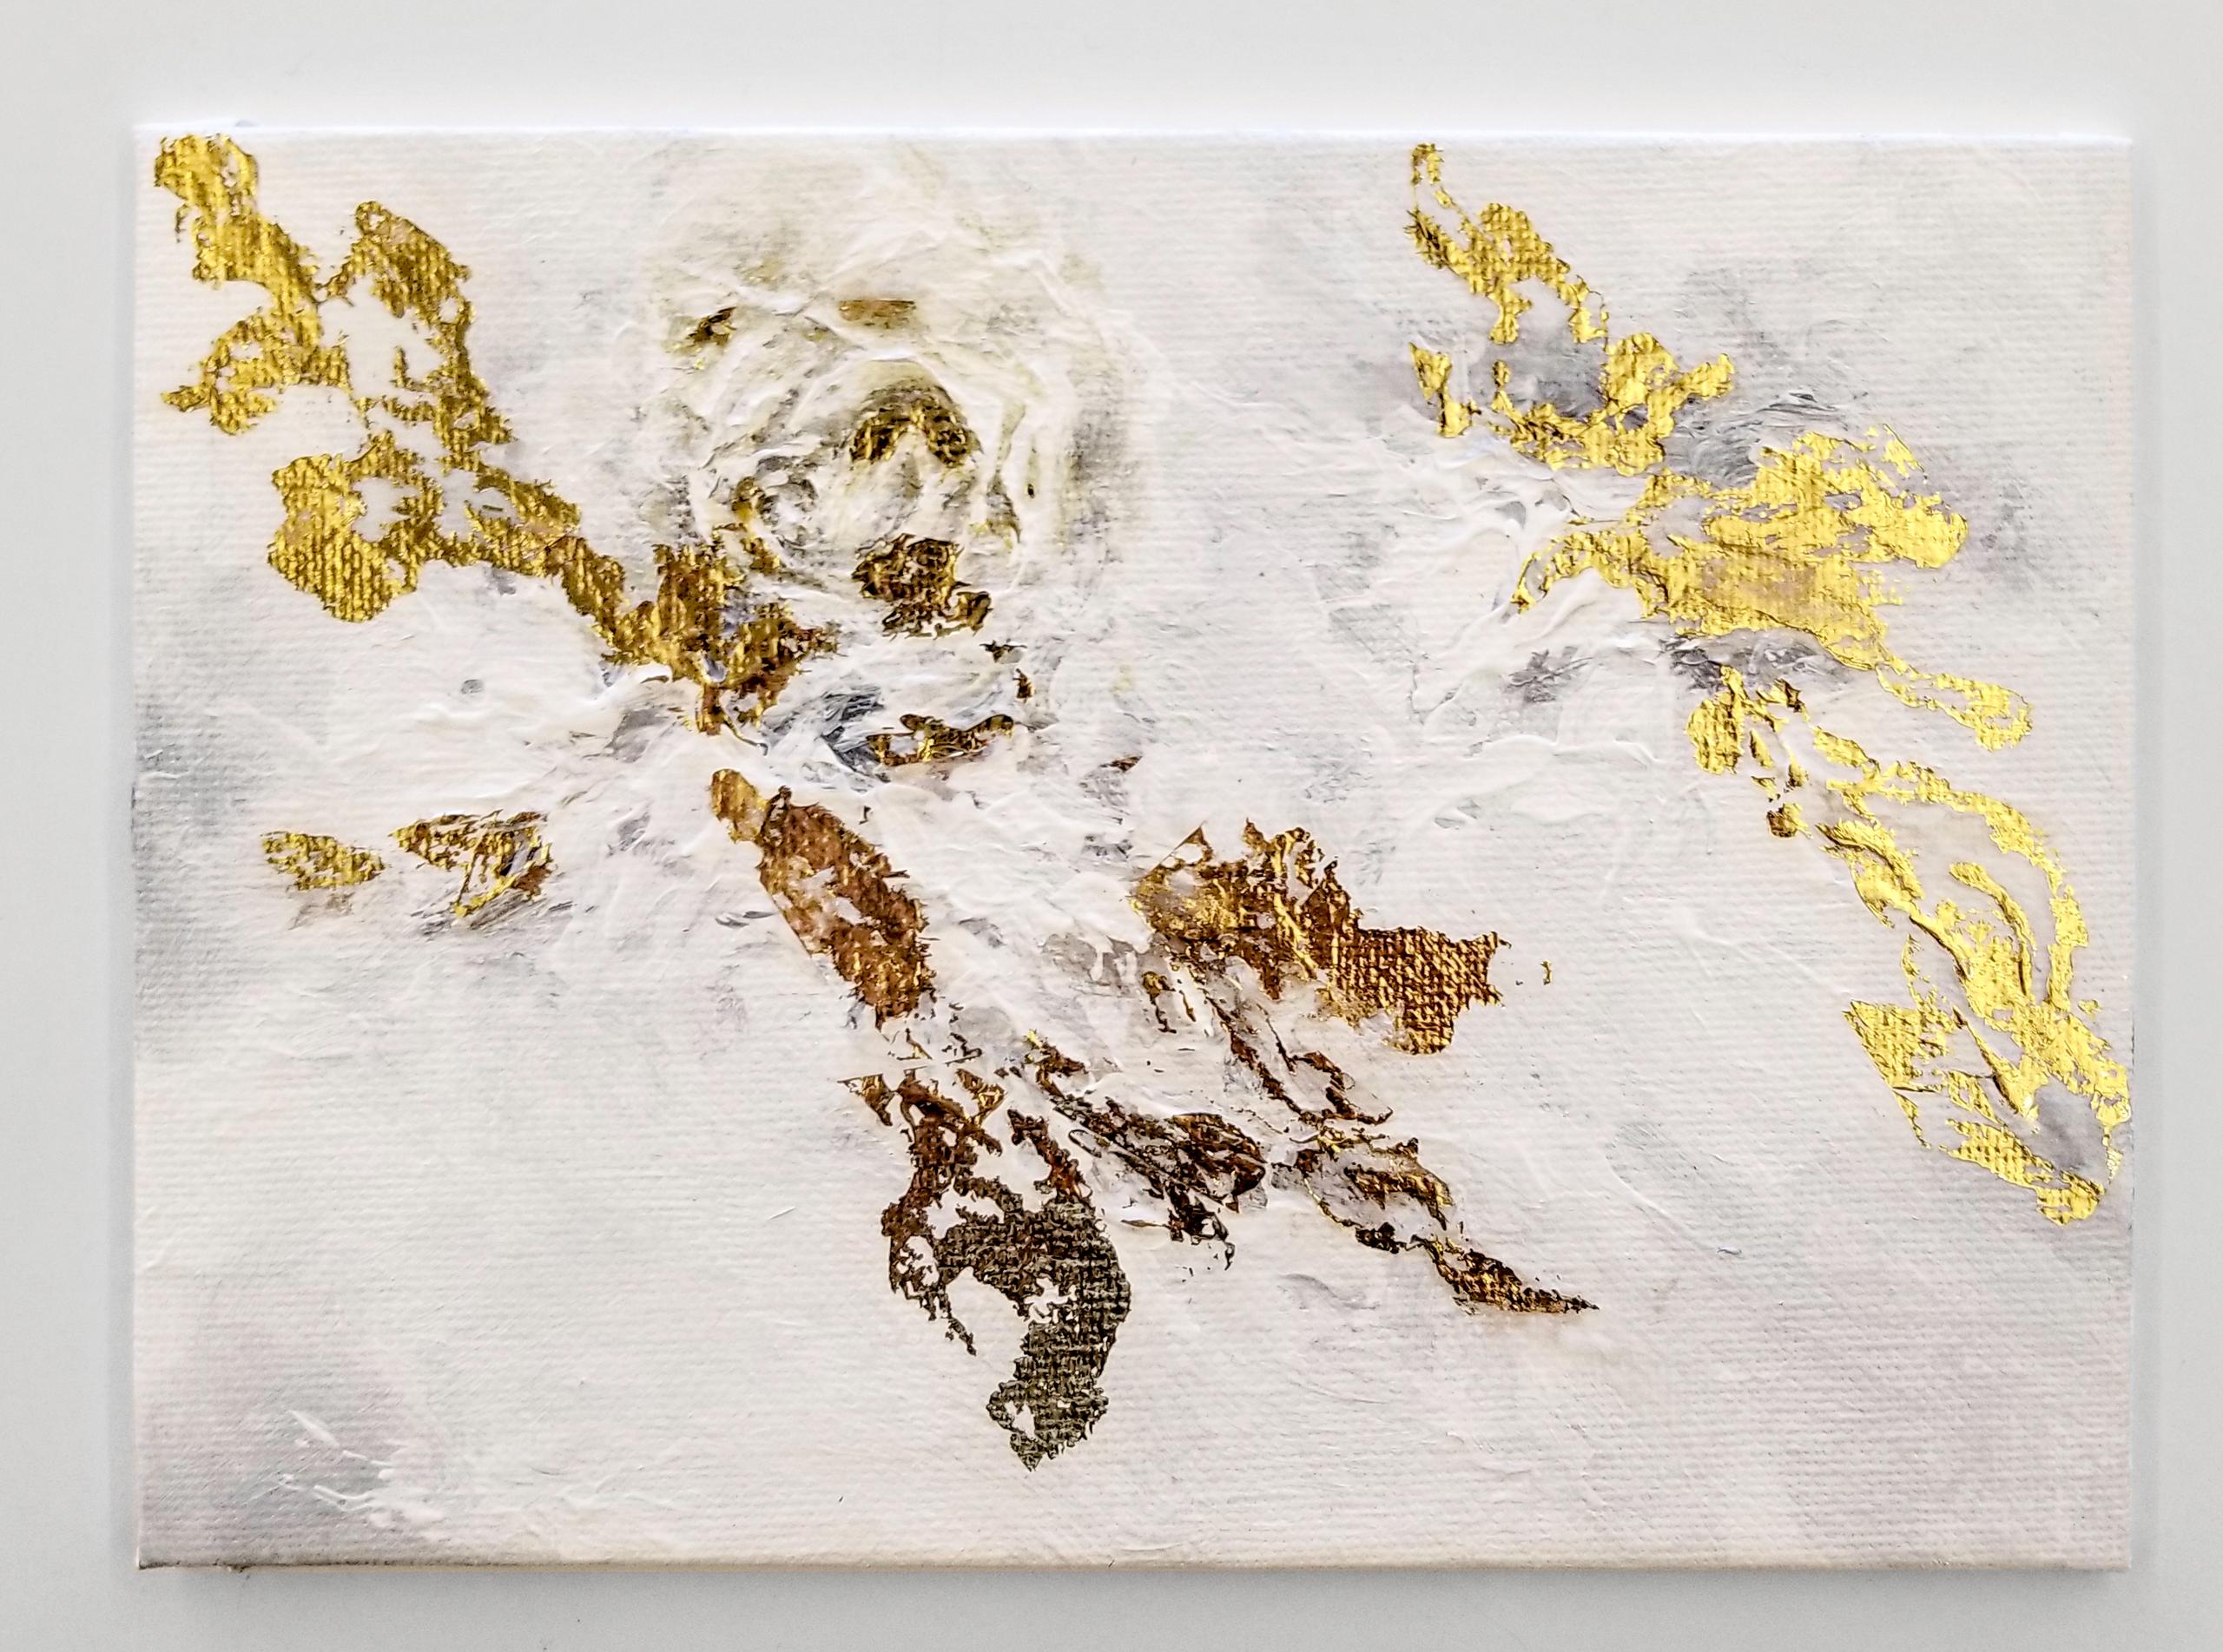 gold leaf on a white and gray canvas painting